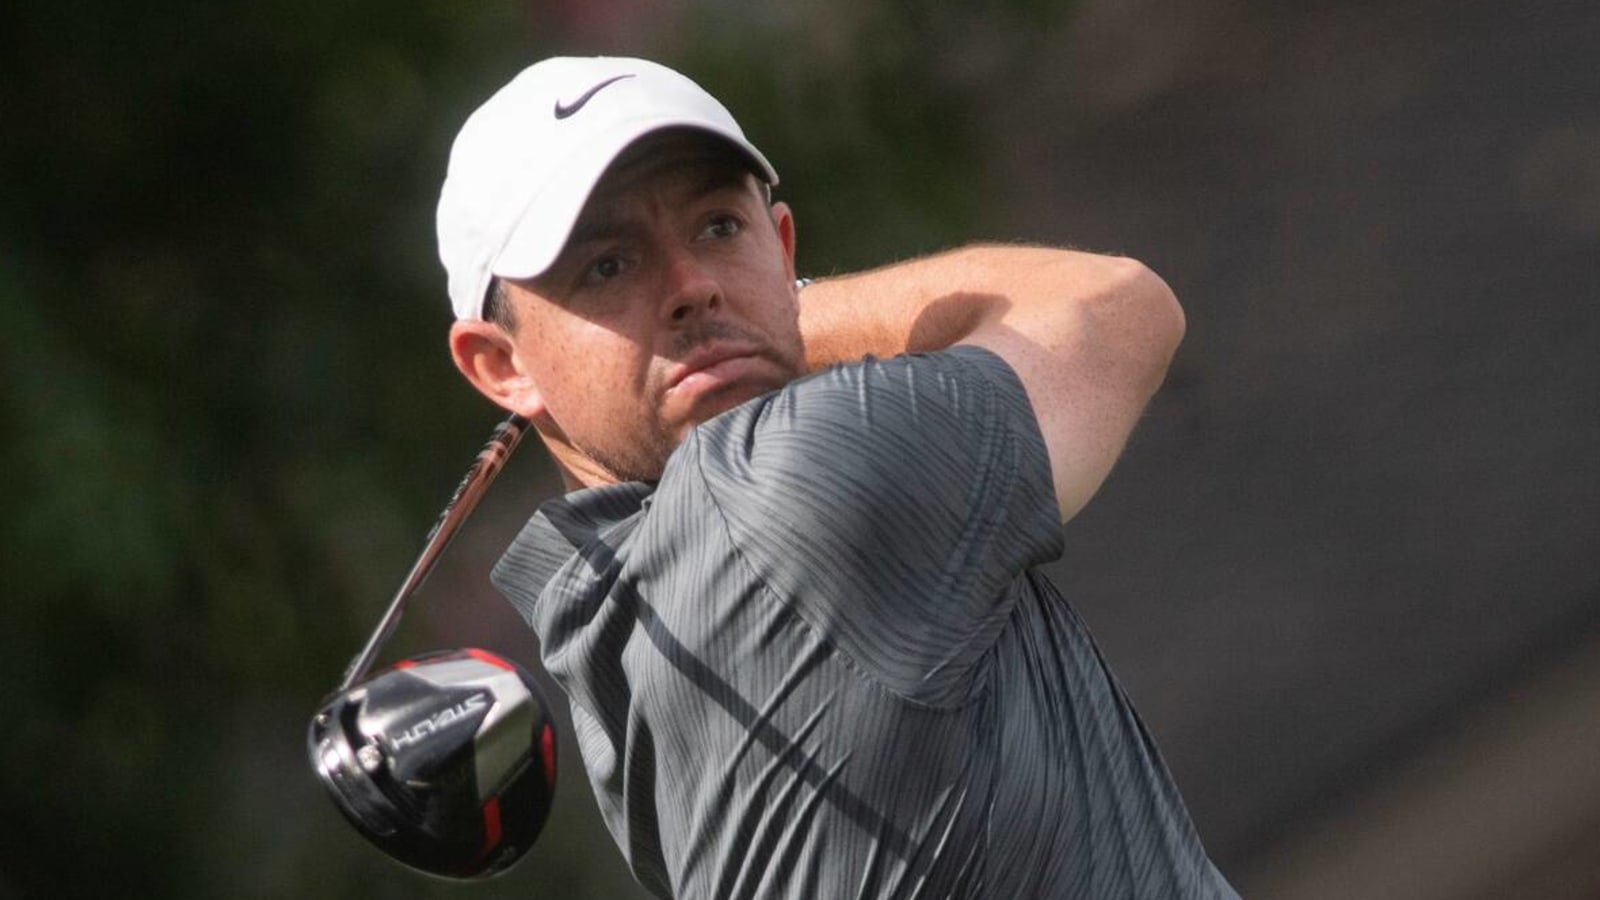 BMW Championship: Rory McIlroy early favorite